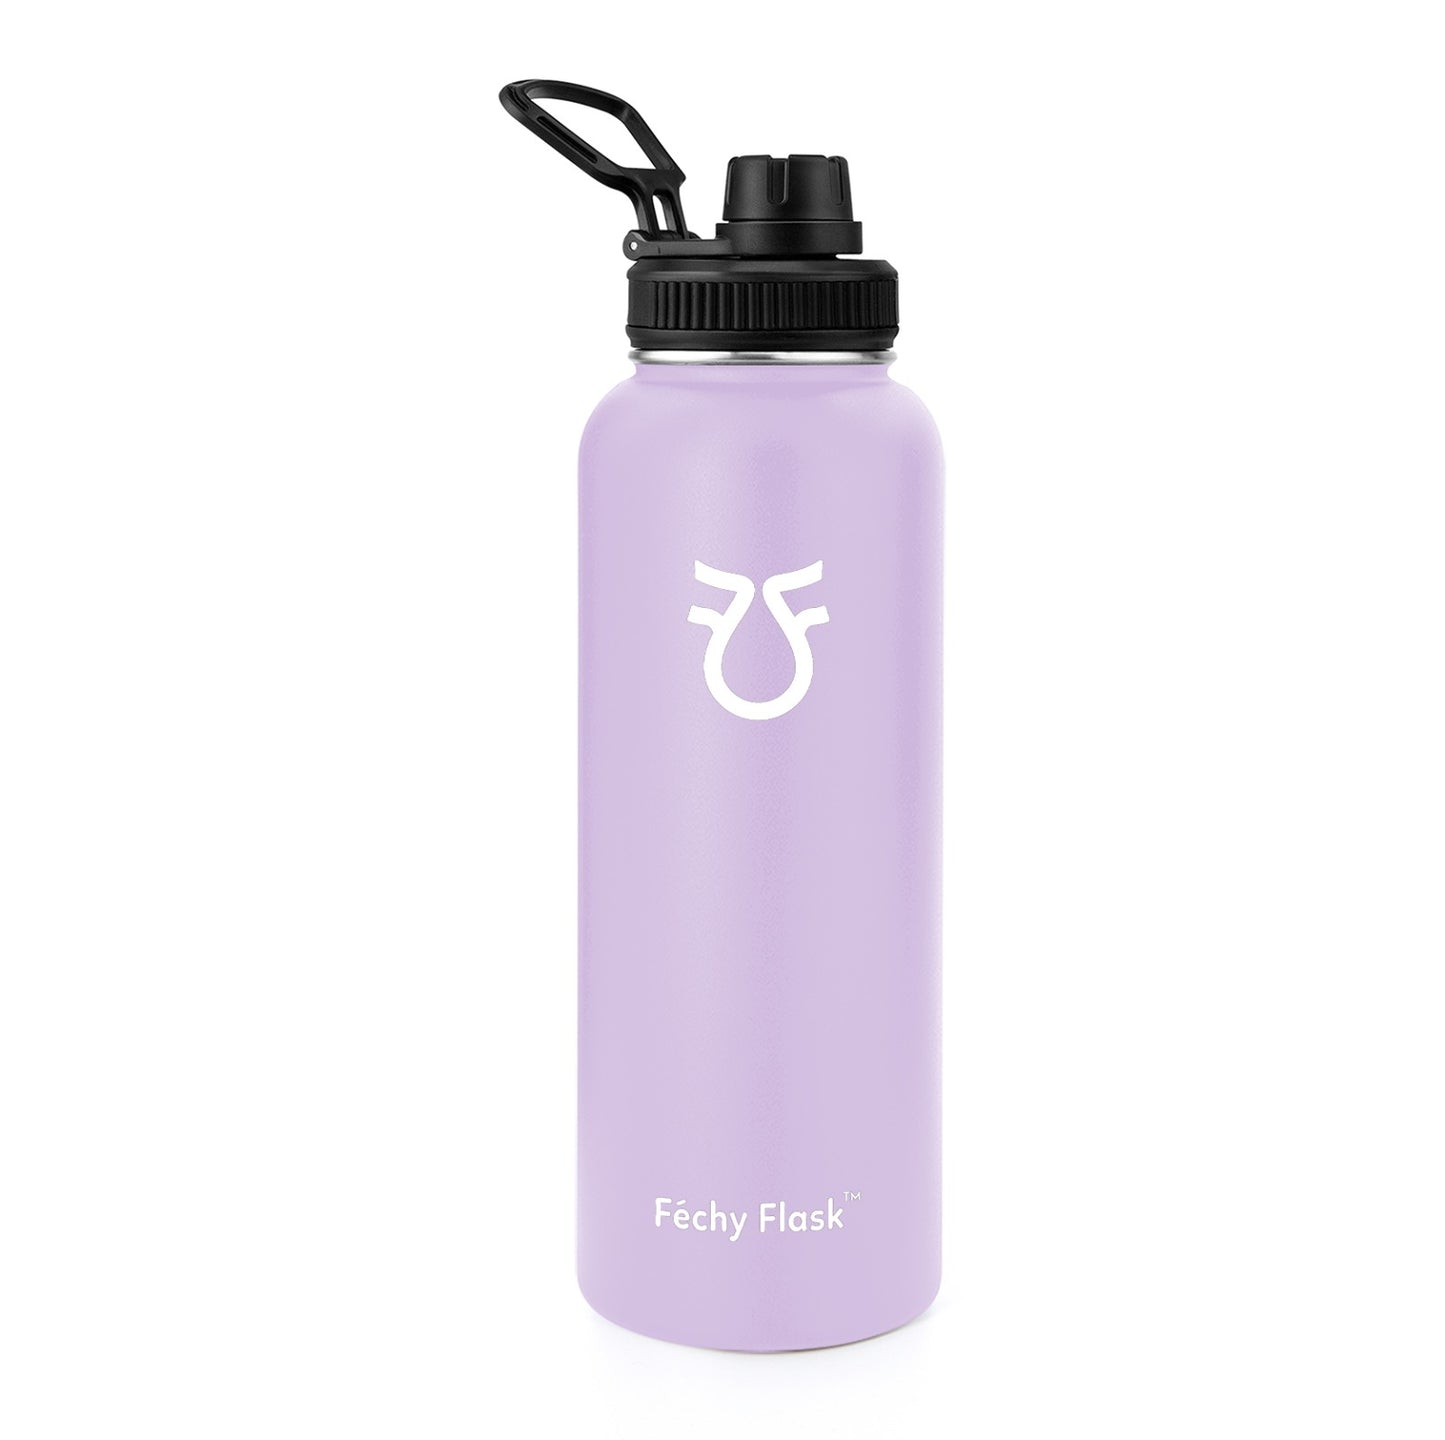 Fechy Stainless Steel insulated Drink Bottle - 1.2L - Pastel